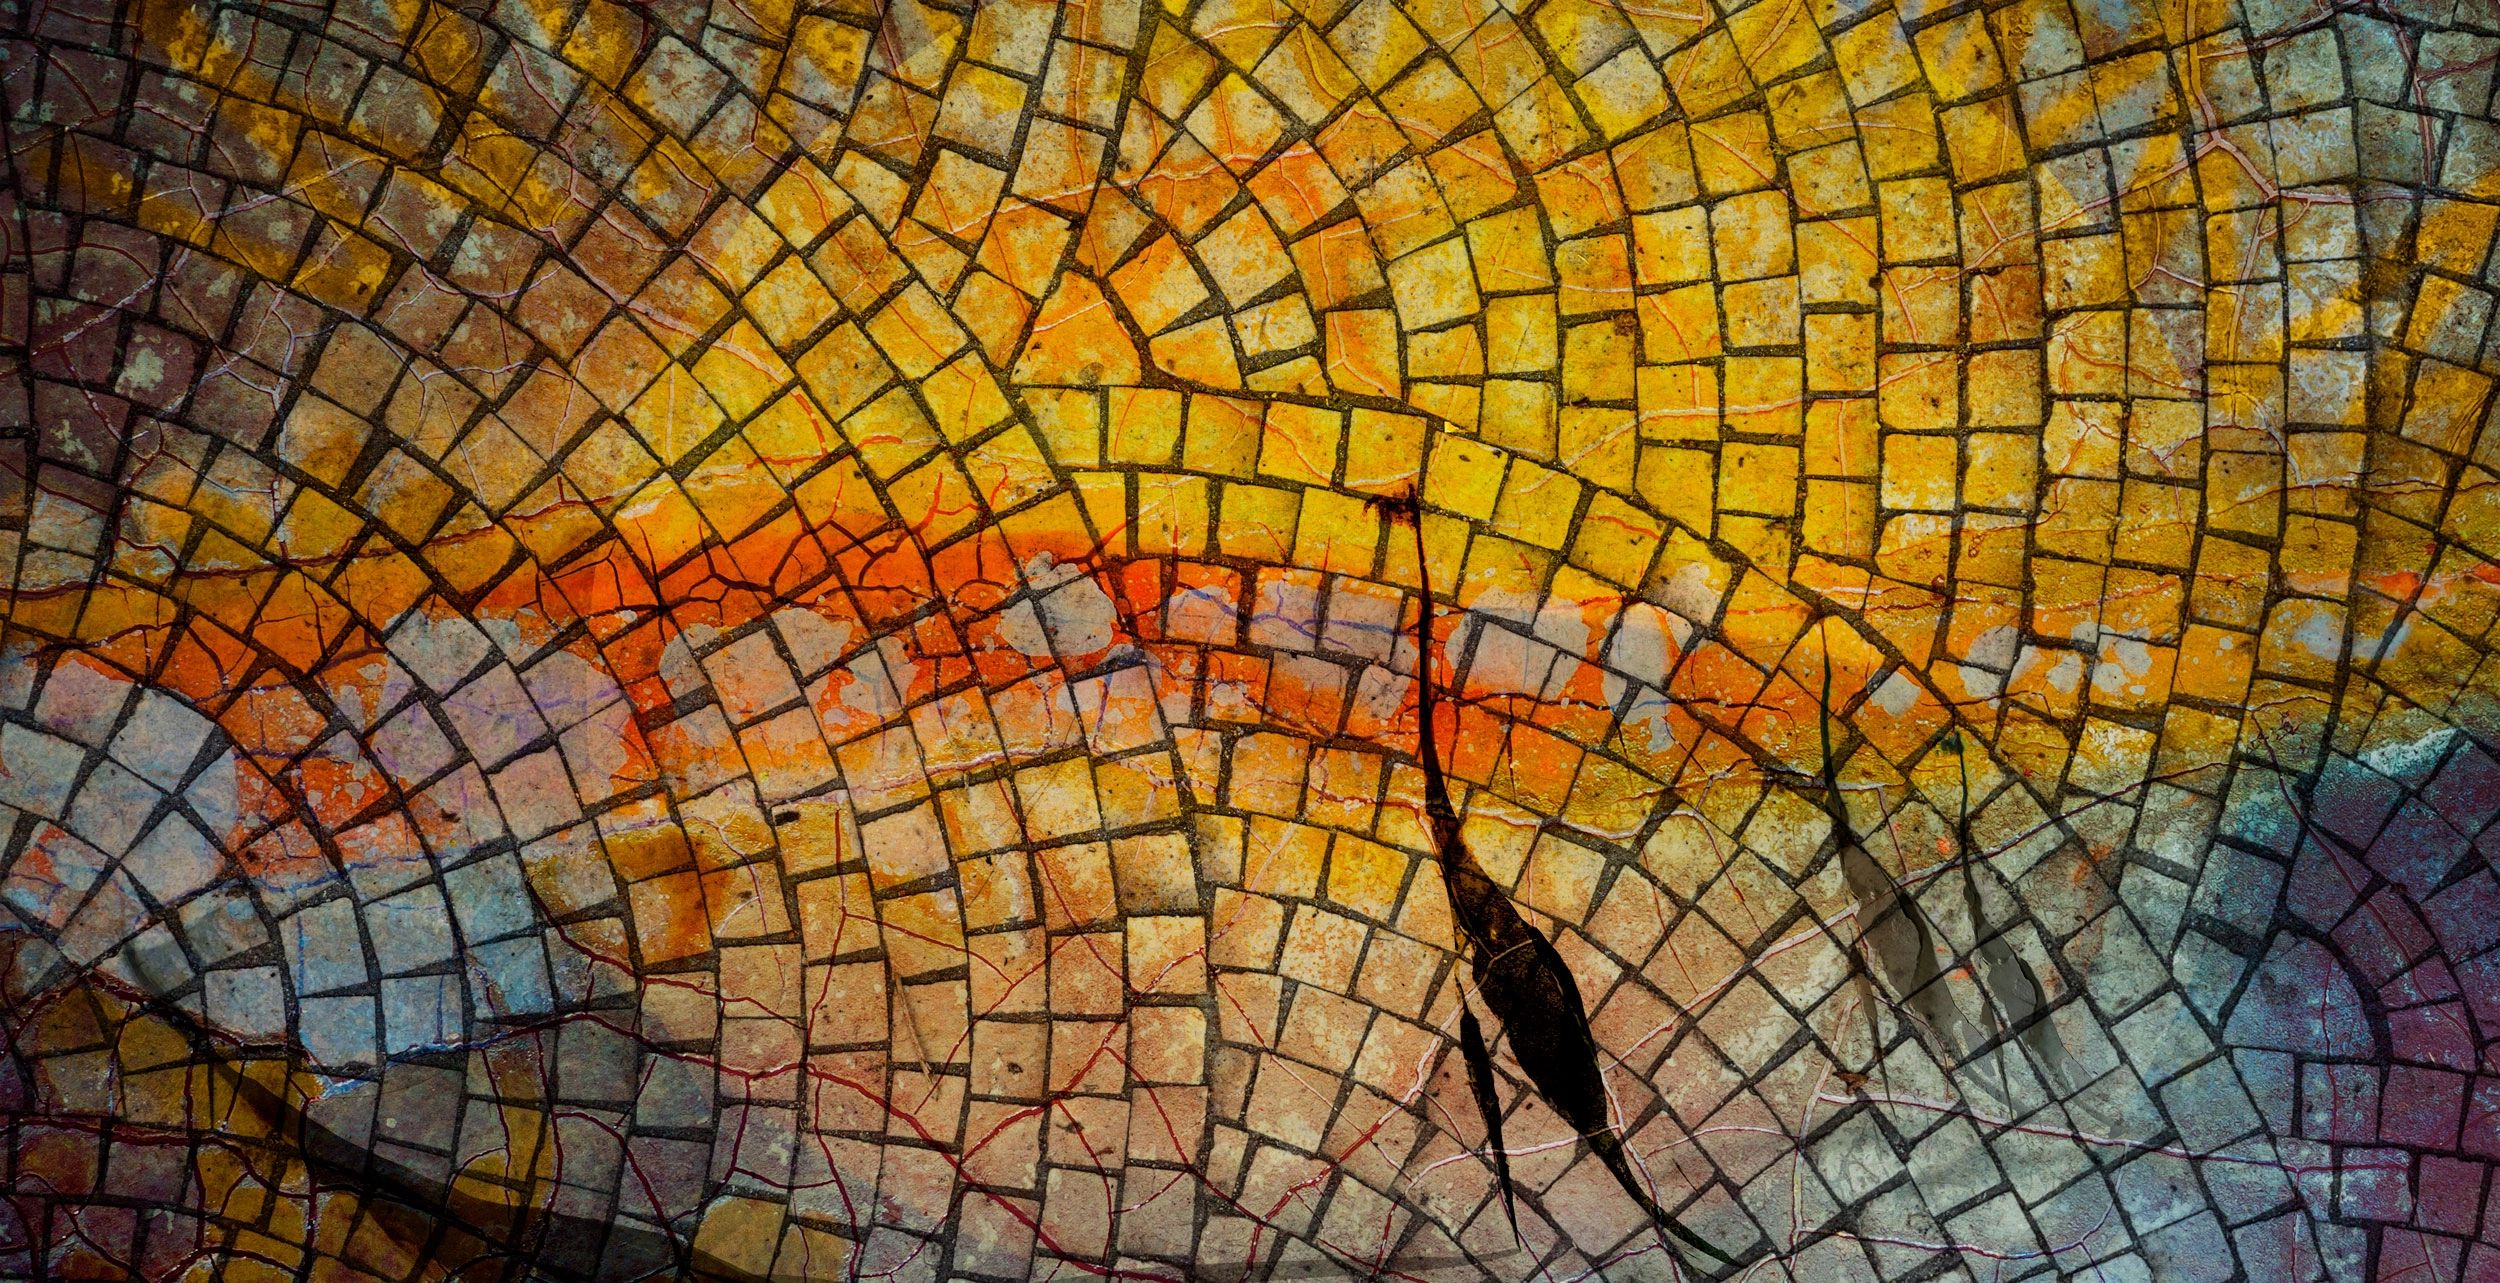 Artwork, "Etherea" by Allison Inglesby, reimagined as a stone mosaic.